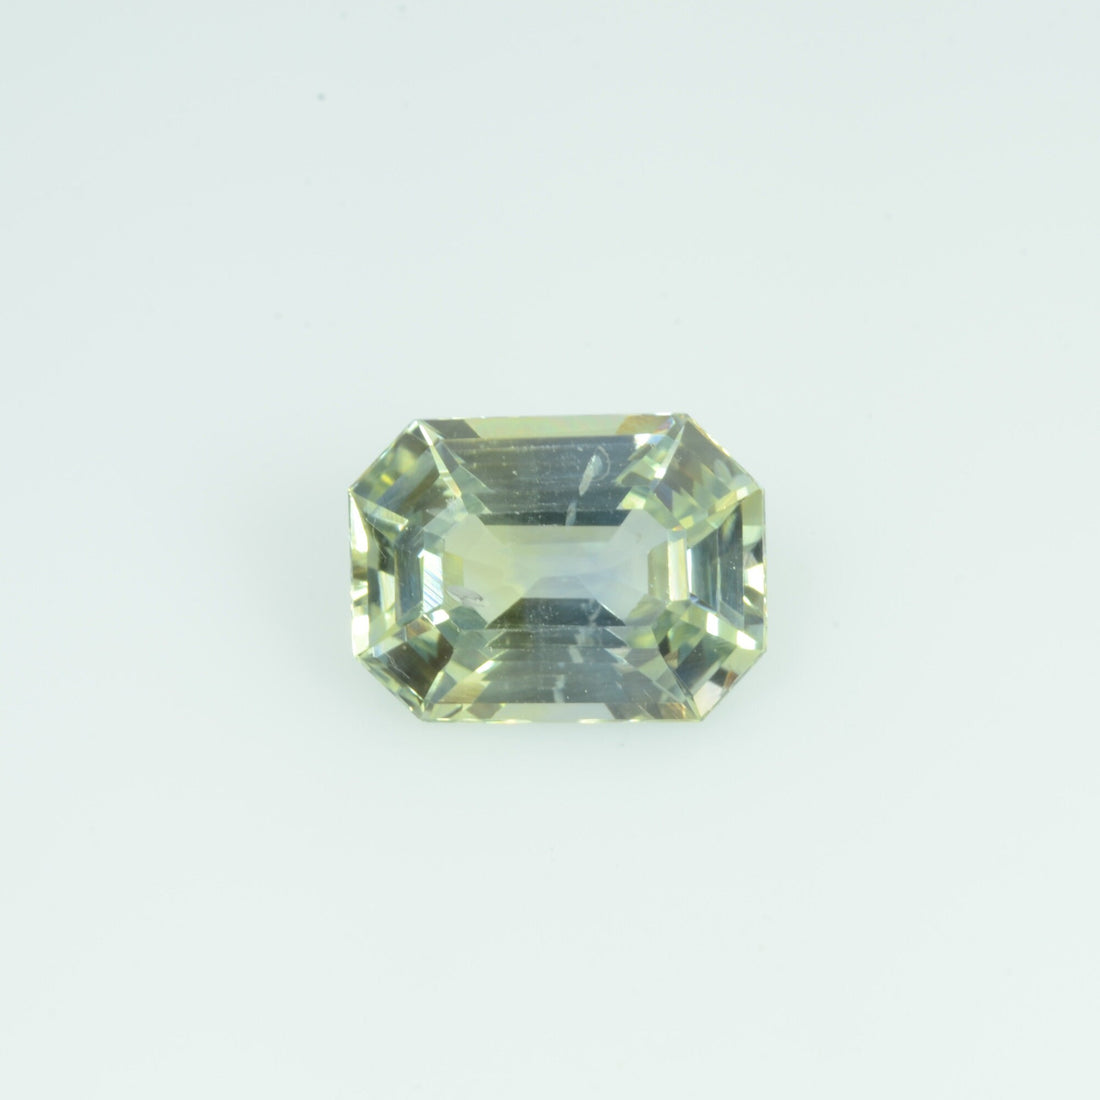 2.47 cts Natural Yellow Sapphire Loose Gemstone Octagon Cut